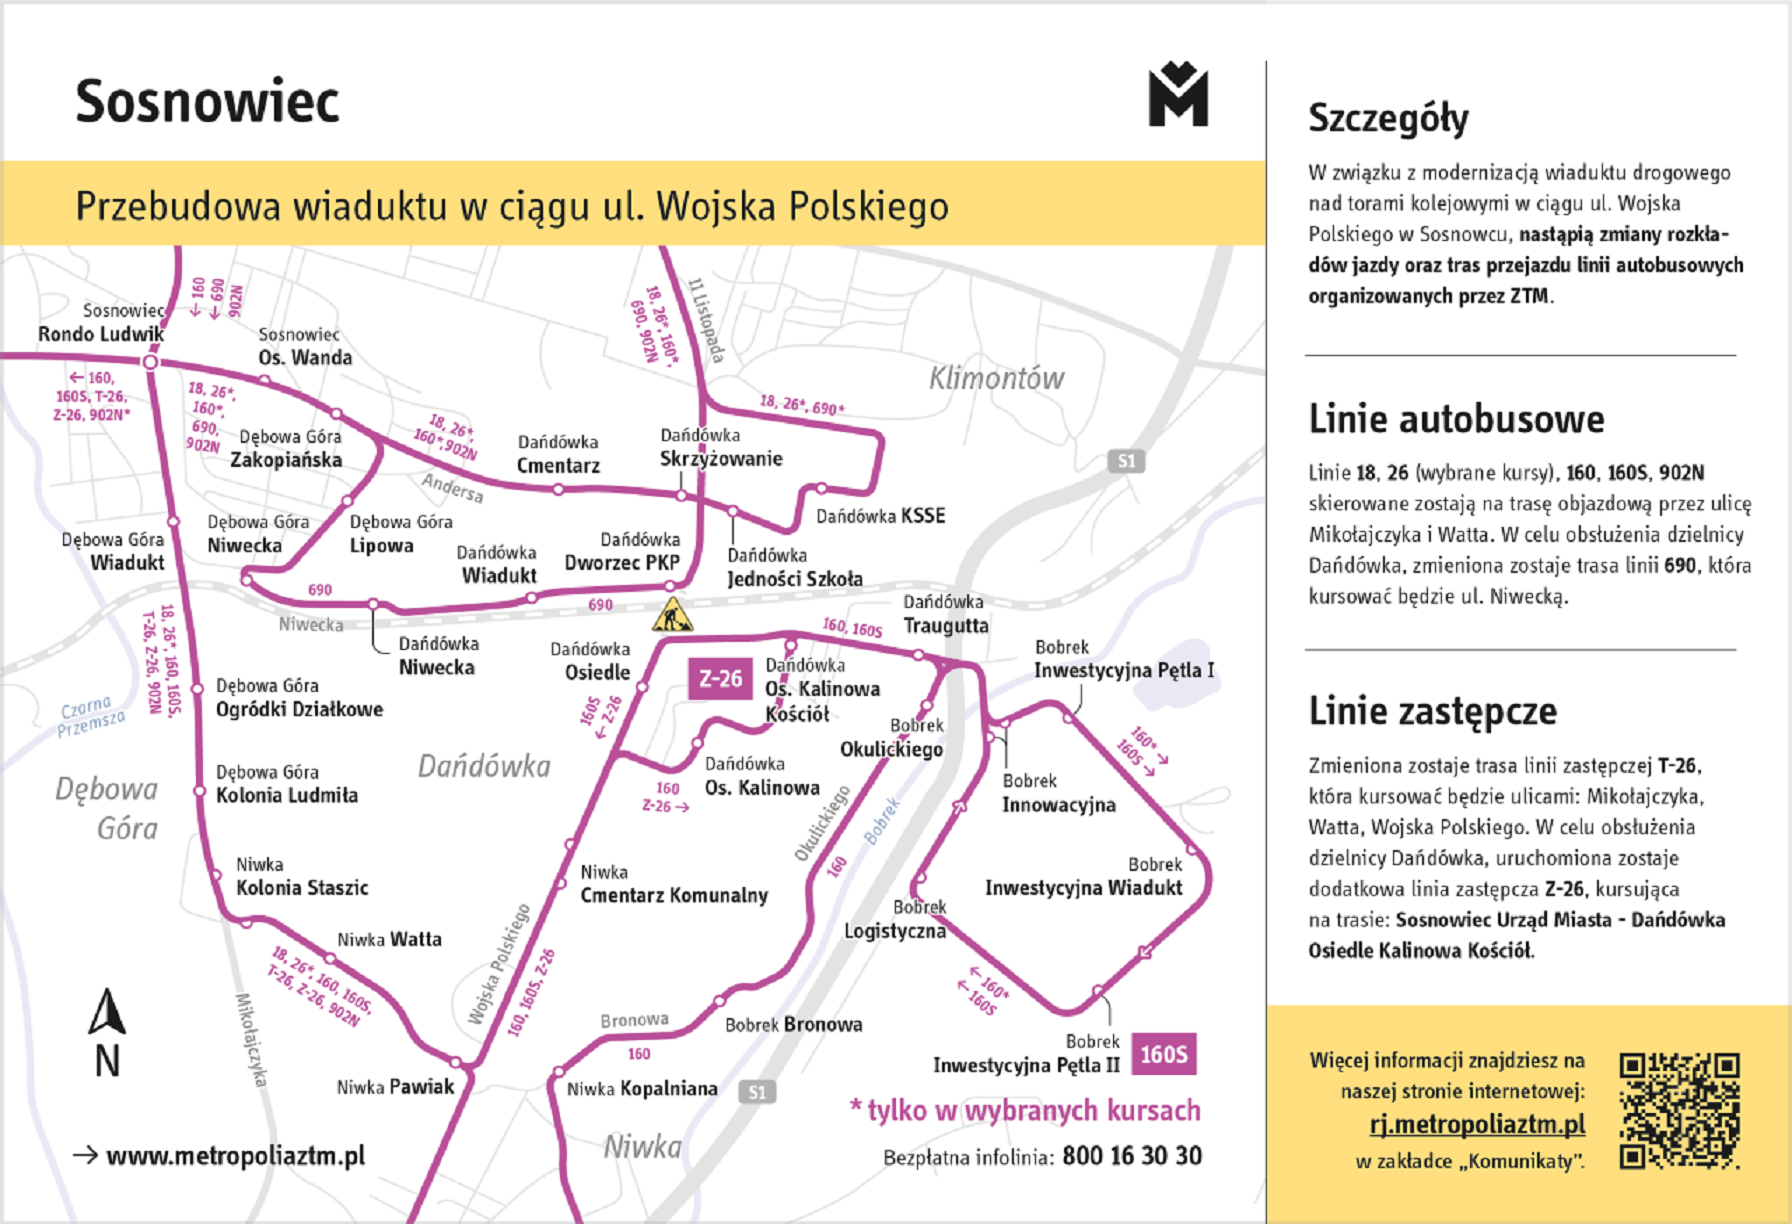 Graphics: The Wojska Polskiego street closed and changes in the urban transport